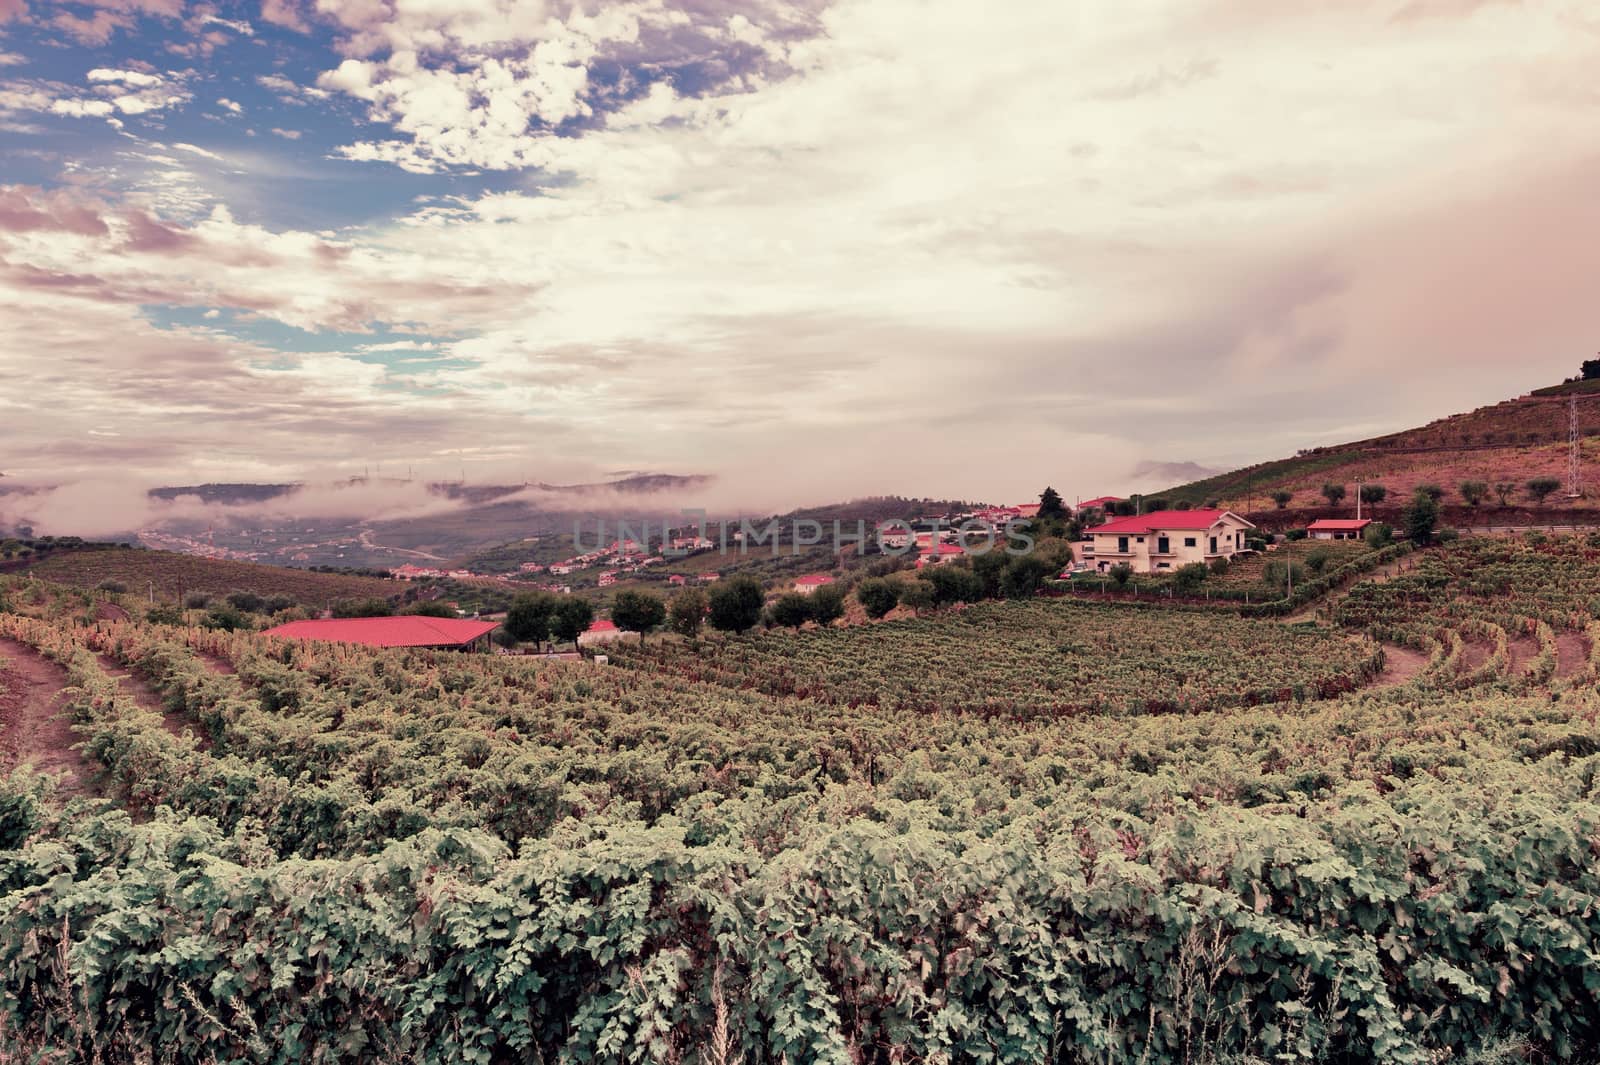 Extensive Vineyards on the Hills of Portugal, Vintage Style Toned Picture